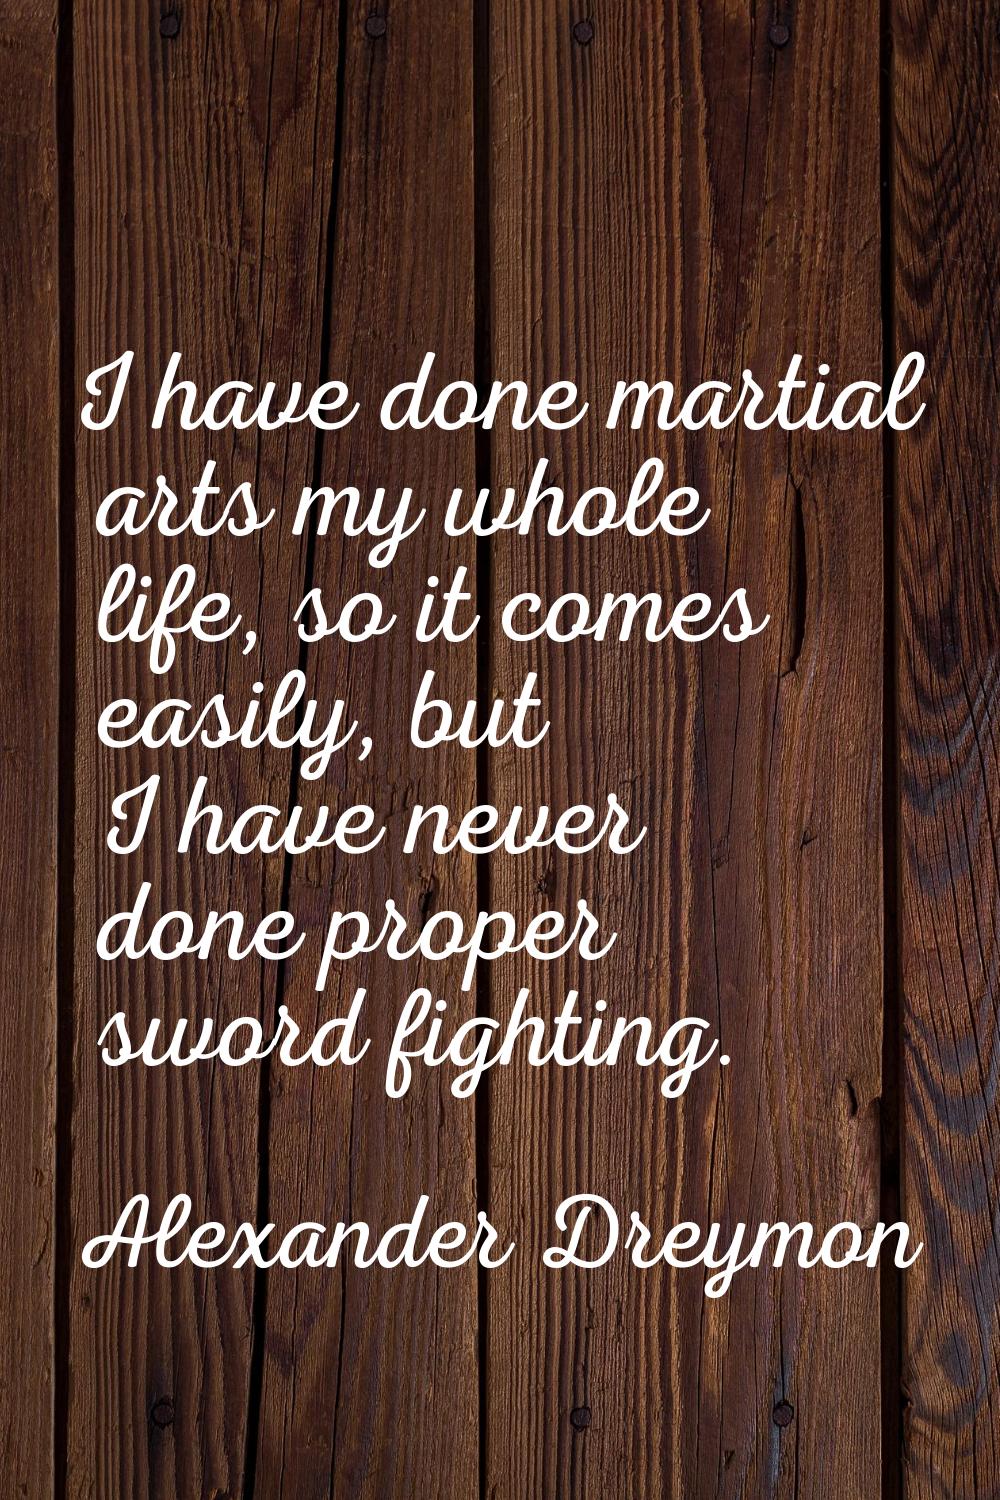 I have done martial arts my whole life, so it comes easily, but I have never done proper sword figh